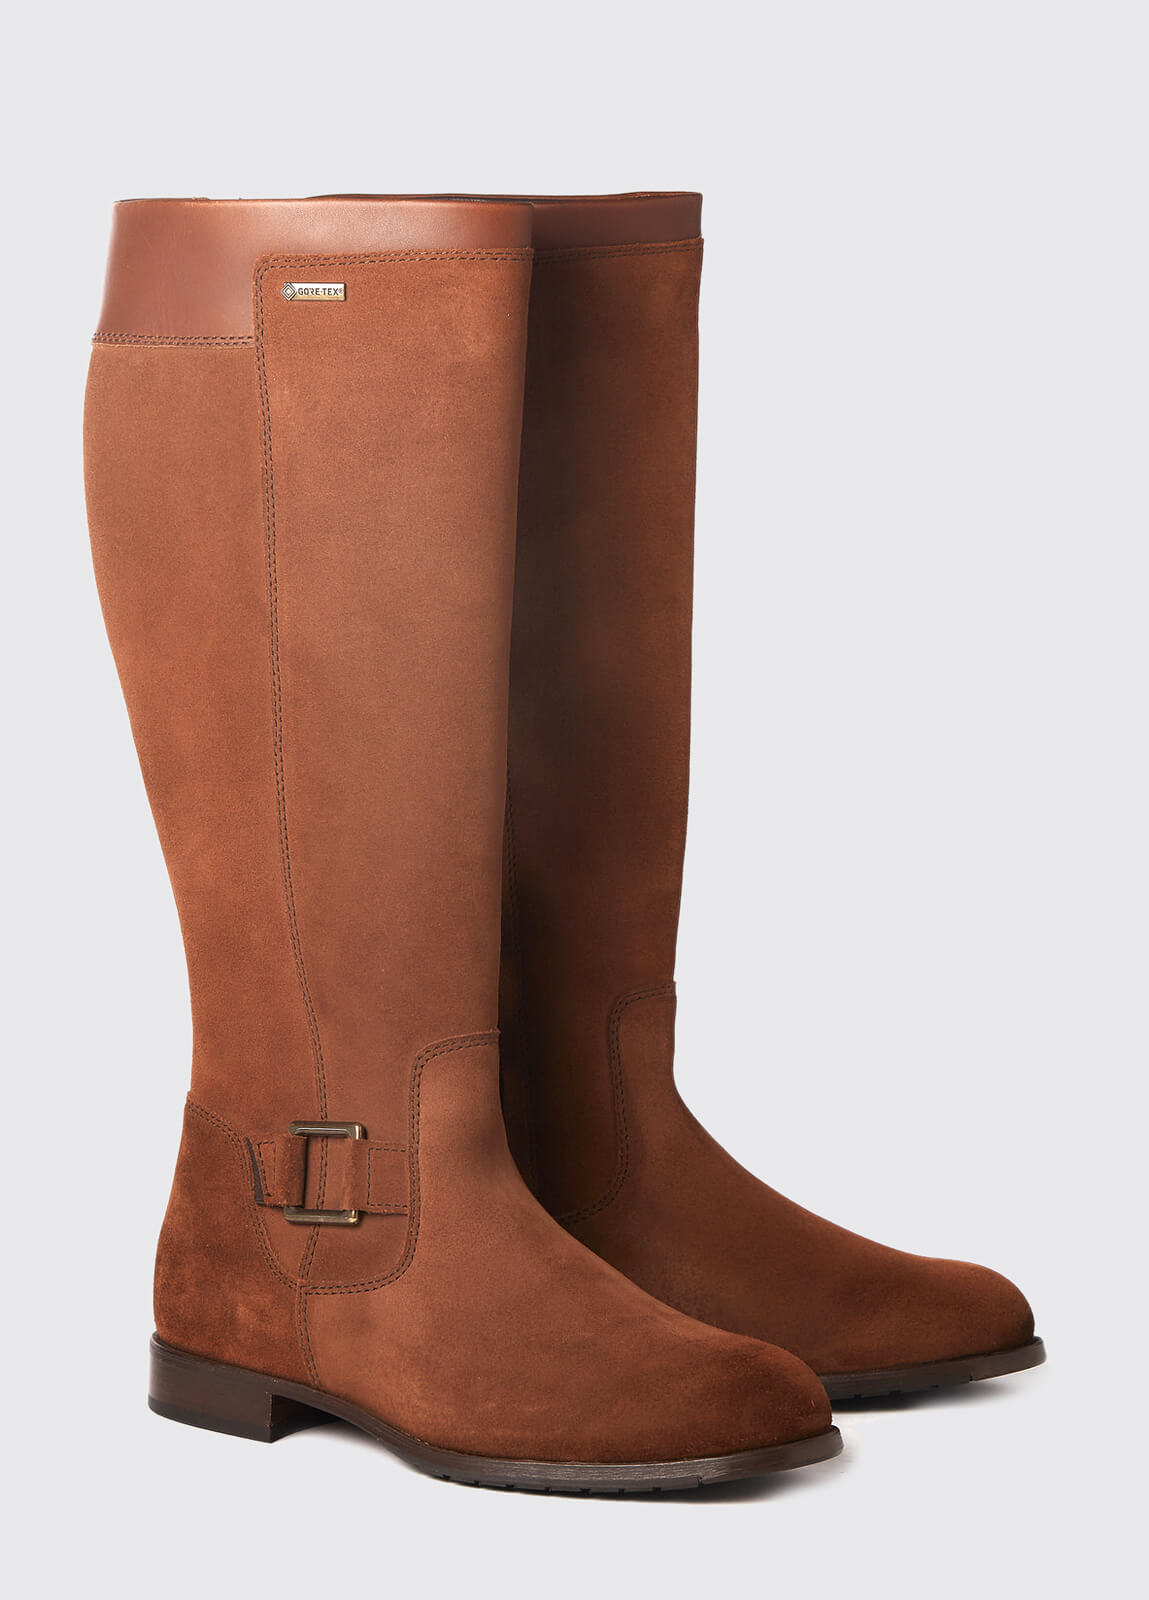 Limerick Leather Soled Boot - Russet